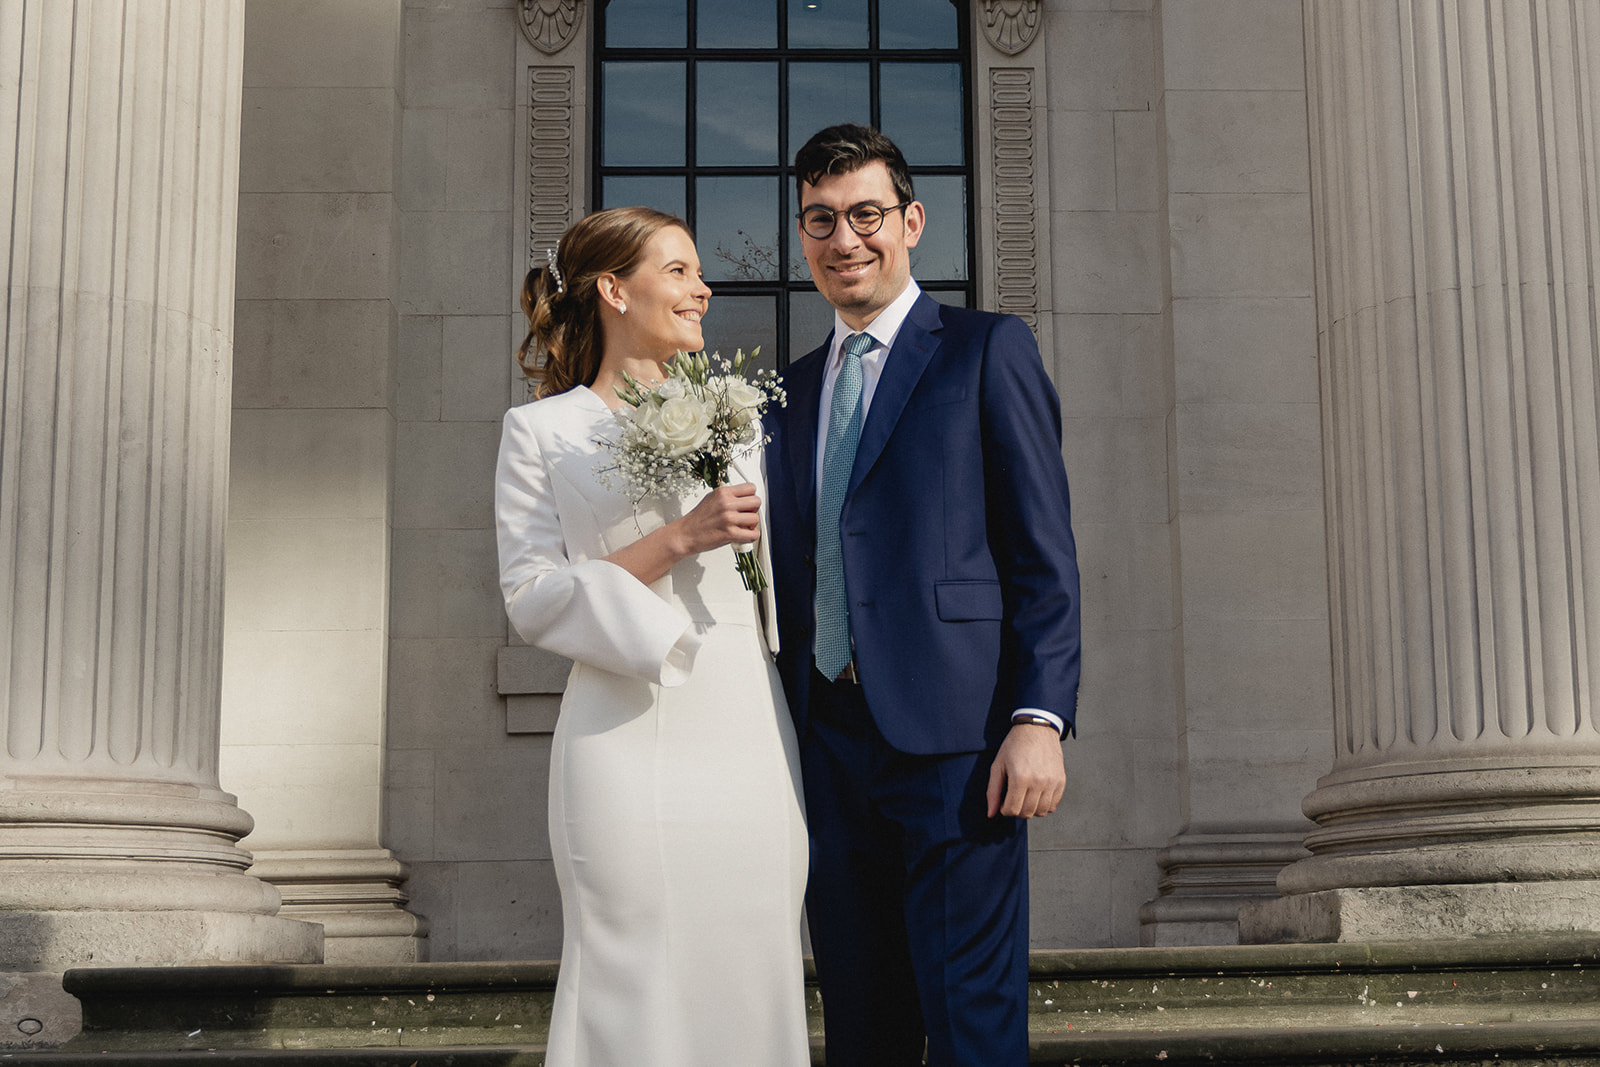 Kinga and Jean-Marc's stunning portrait on the steps of Marylebone Town Hall